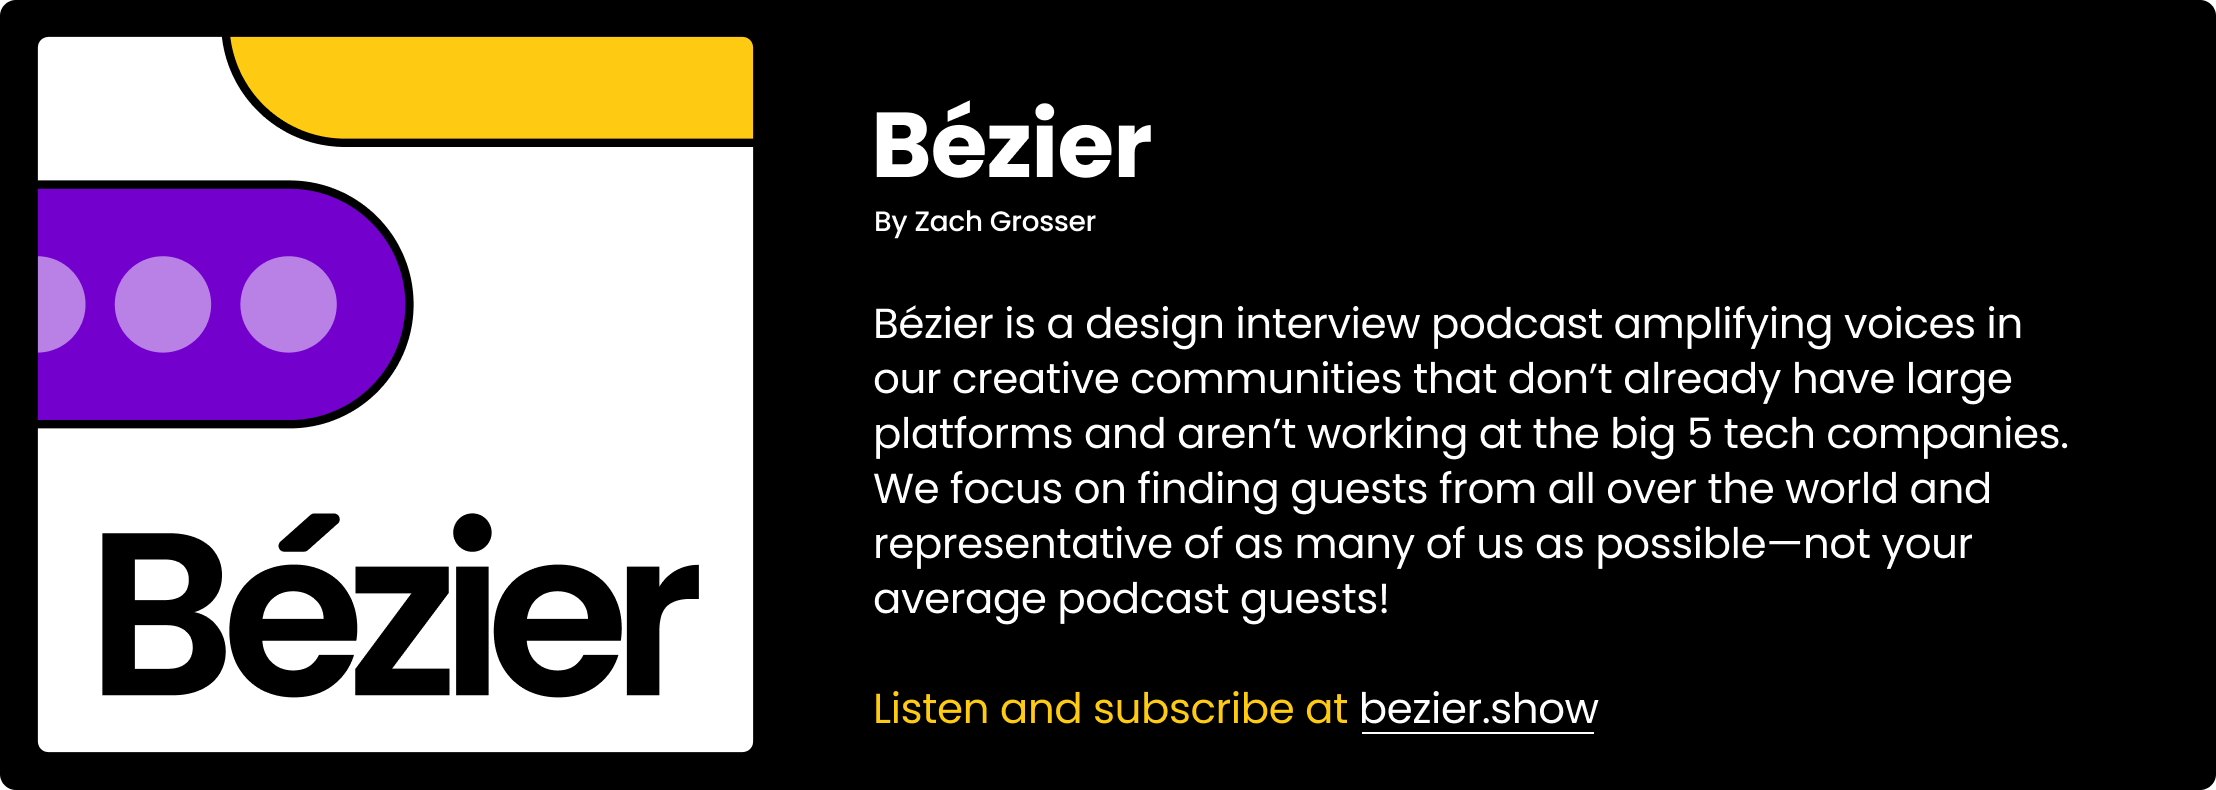 A screenshot of the Bézier website description, which says: "Bézier is a design interview podcast amplifying voices in our creative communities that don’t already have large platforms and aren’t working at the big 5 tech companies. We focus on finding guests from all over the world and representative of as many of us as possible—not your average podcast guests!"